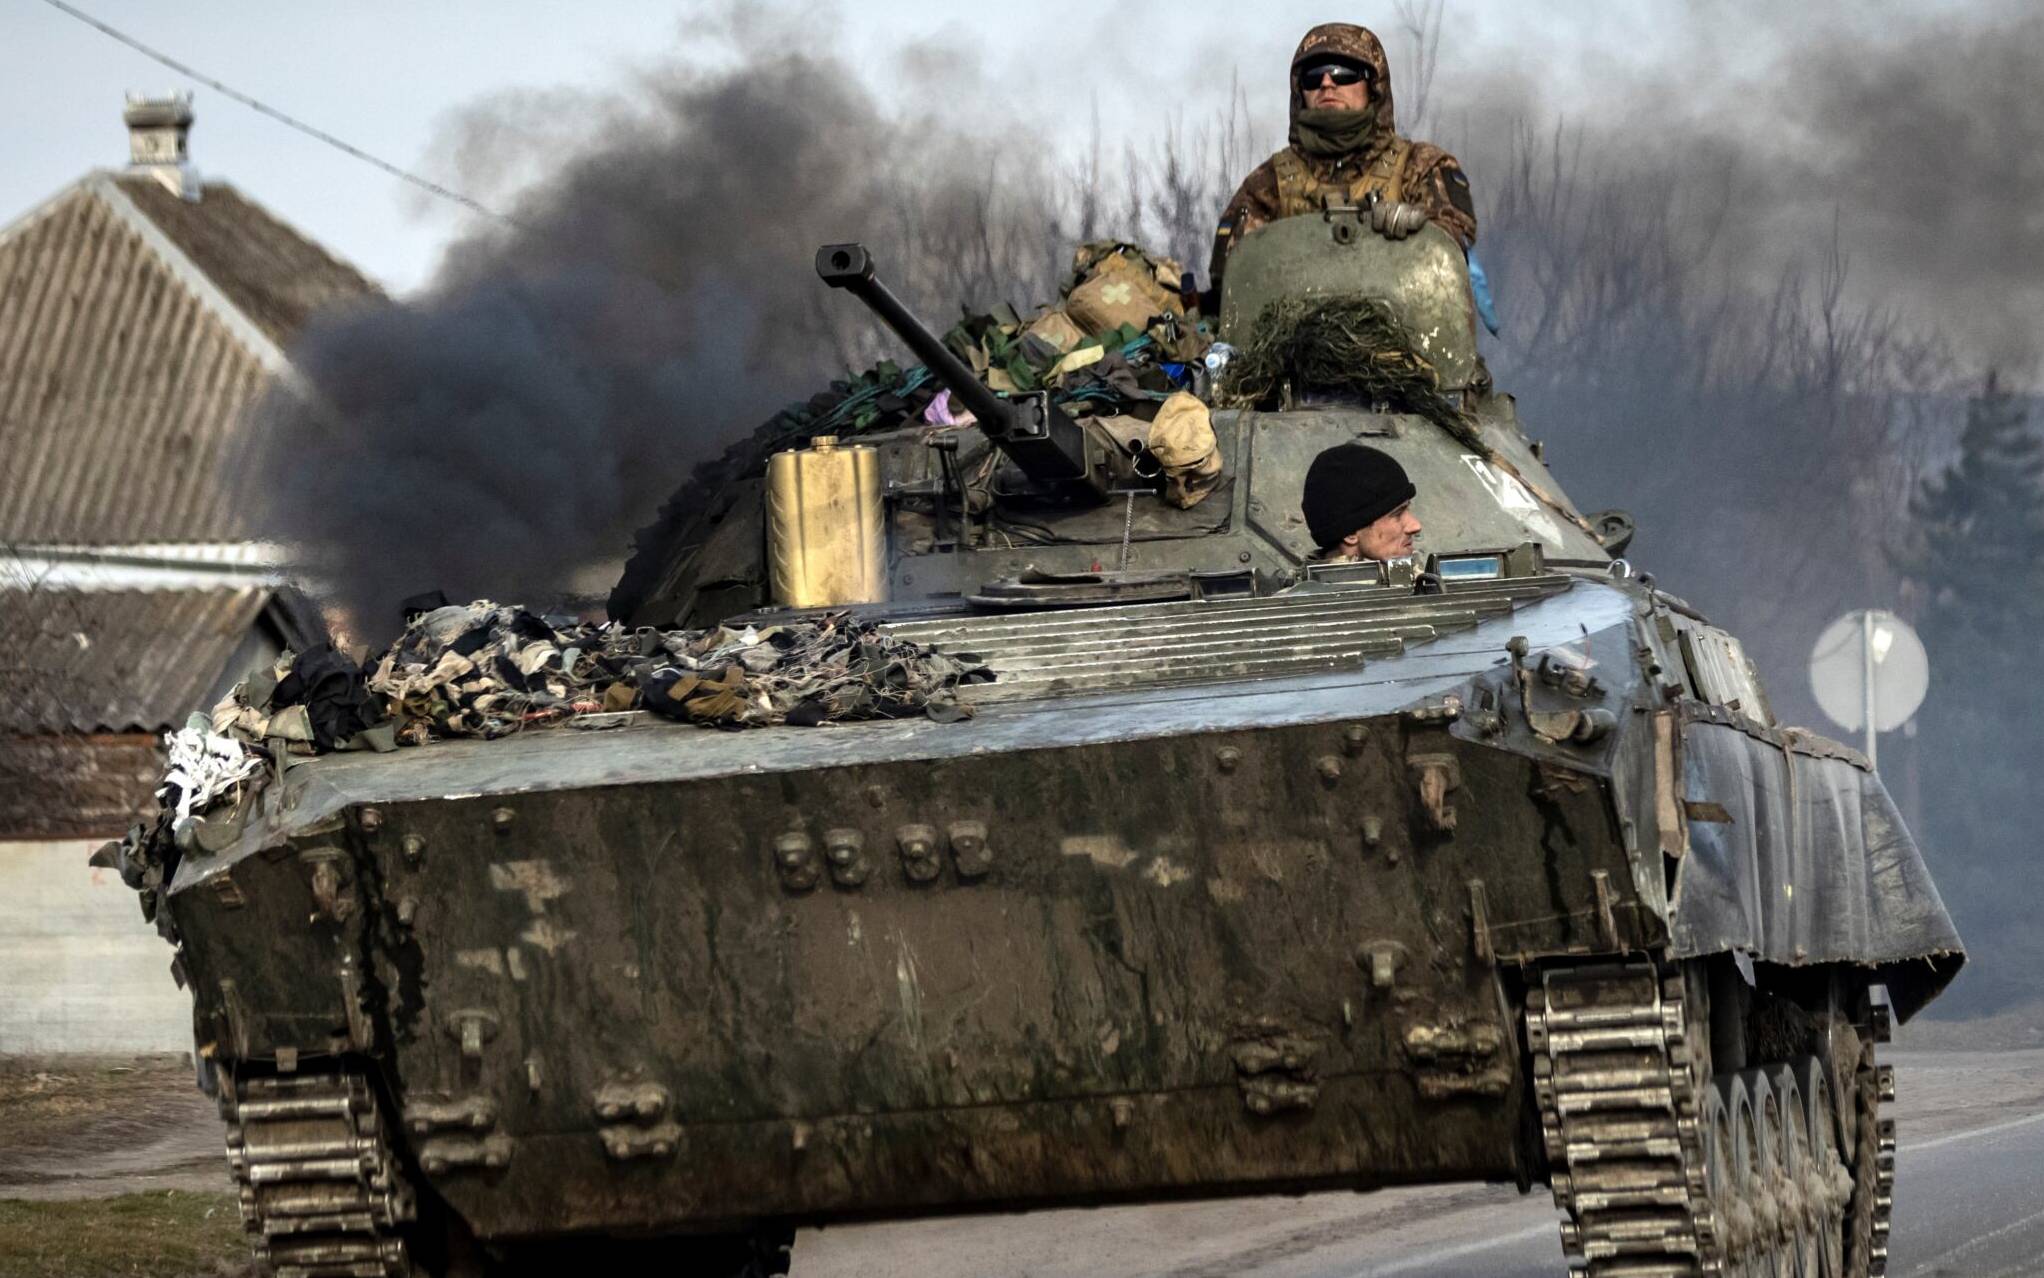 A Ukrainian tank steers his way on a road in the northeastern city of Trostyanets, on March 29, 2022. - Ukraine said on March 26, 2022 its forces had recaptured the town of Trostyanets, near the Russian border, one of the first towns to fall under Moscow's control in its month-long invasion. (Photo by FADEL SENNA / AFP)